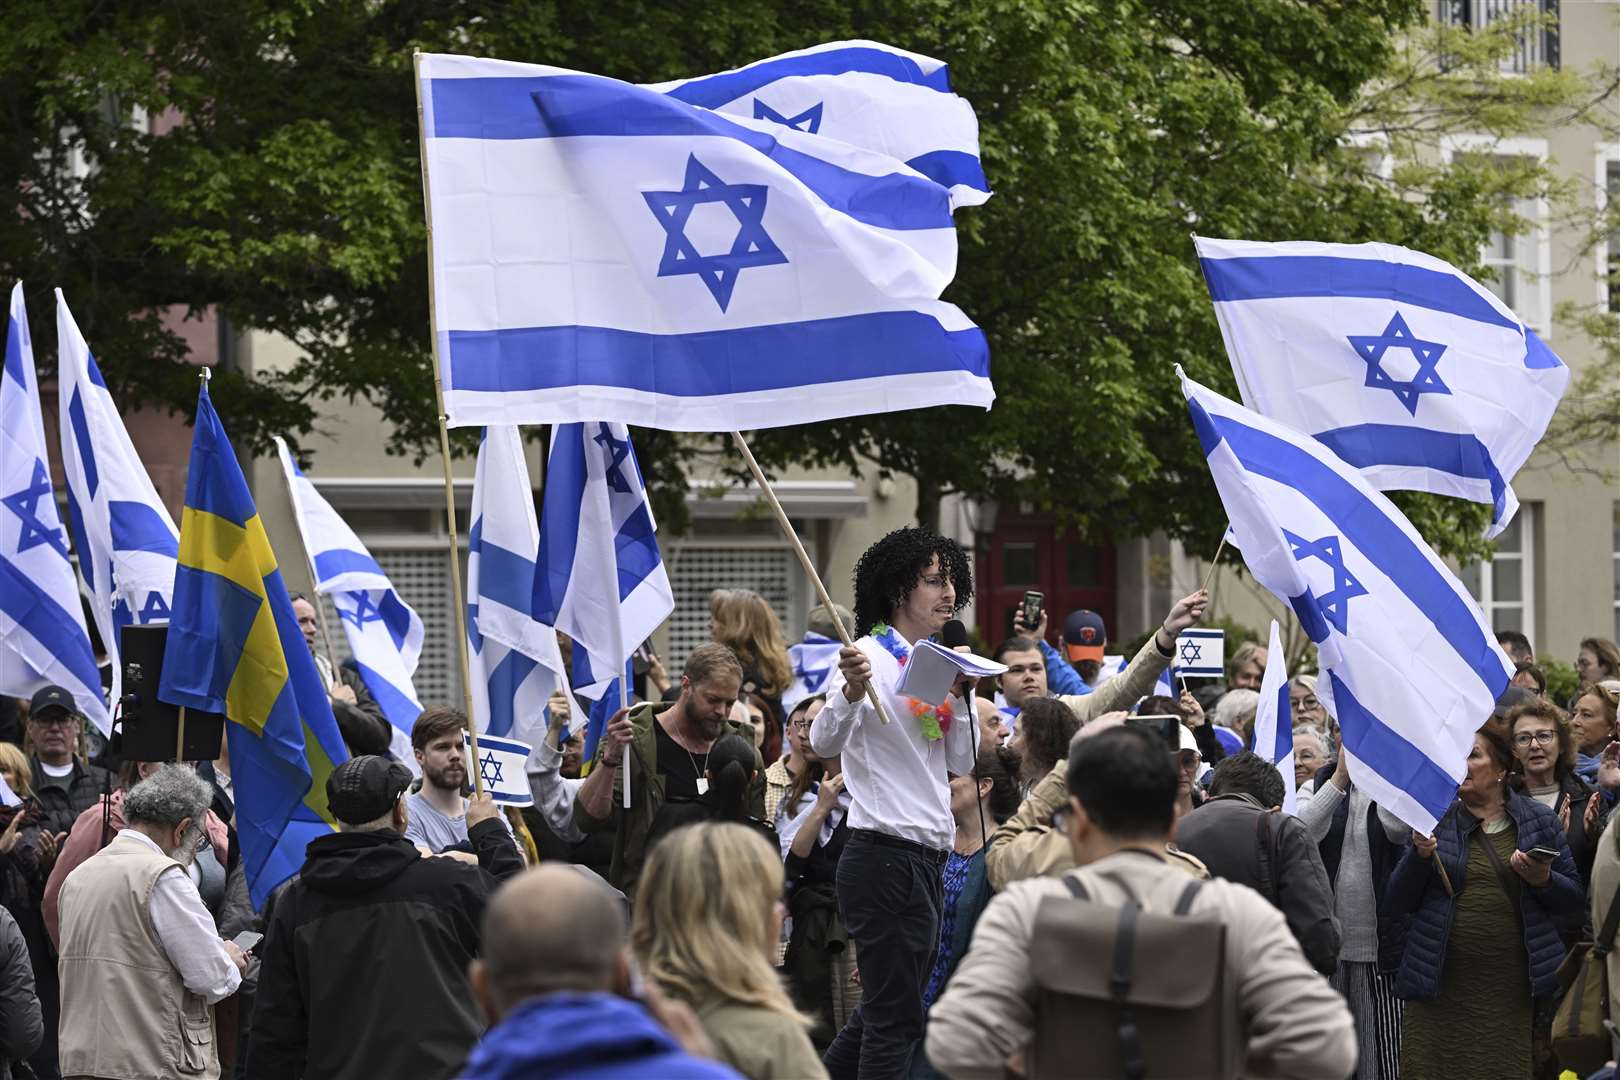 People carry Israeli and Swedish flags during a pro-Israel demonstration to pay tribute to Israel’s Eurovision participant Eden Golan in Malmo, Sweden (Johan Nilsson/TT News Agency via AP)